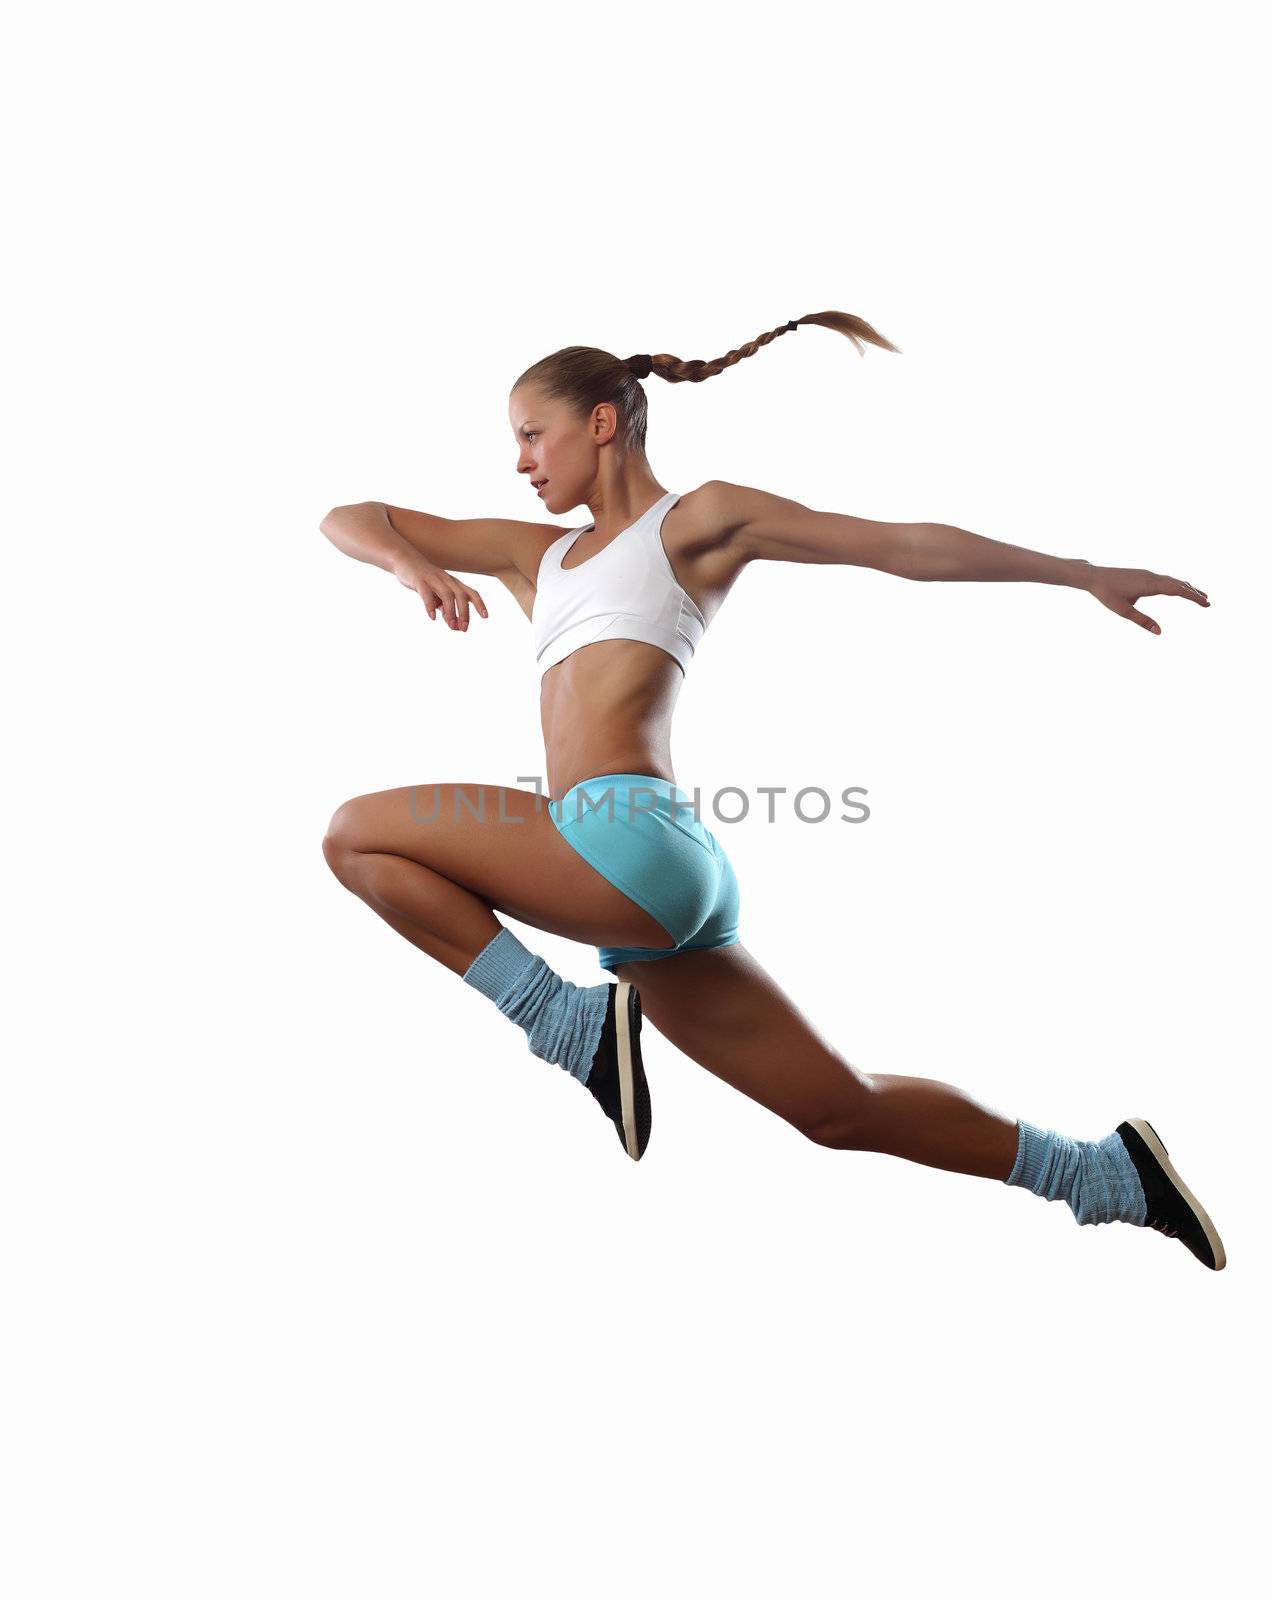 Image of sport woman jumping by sergey_nivens